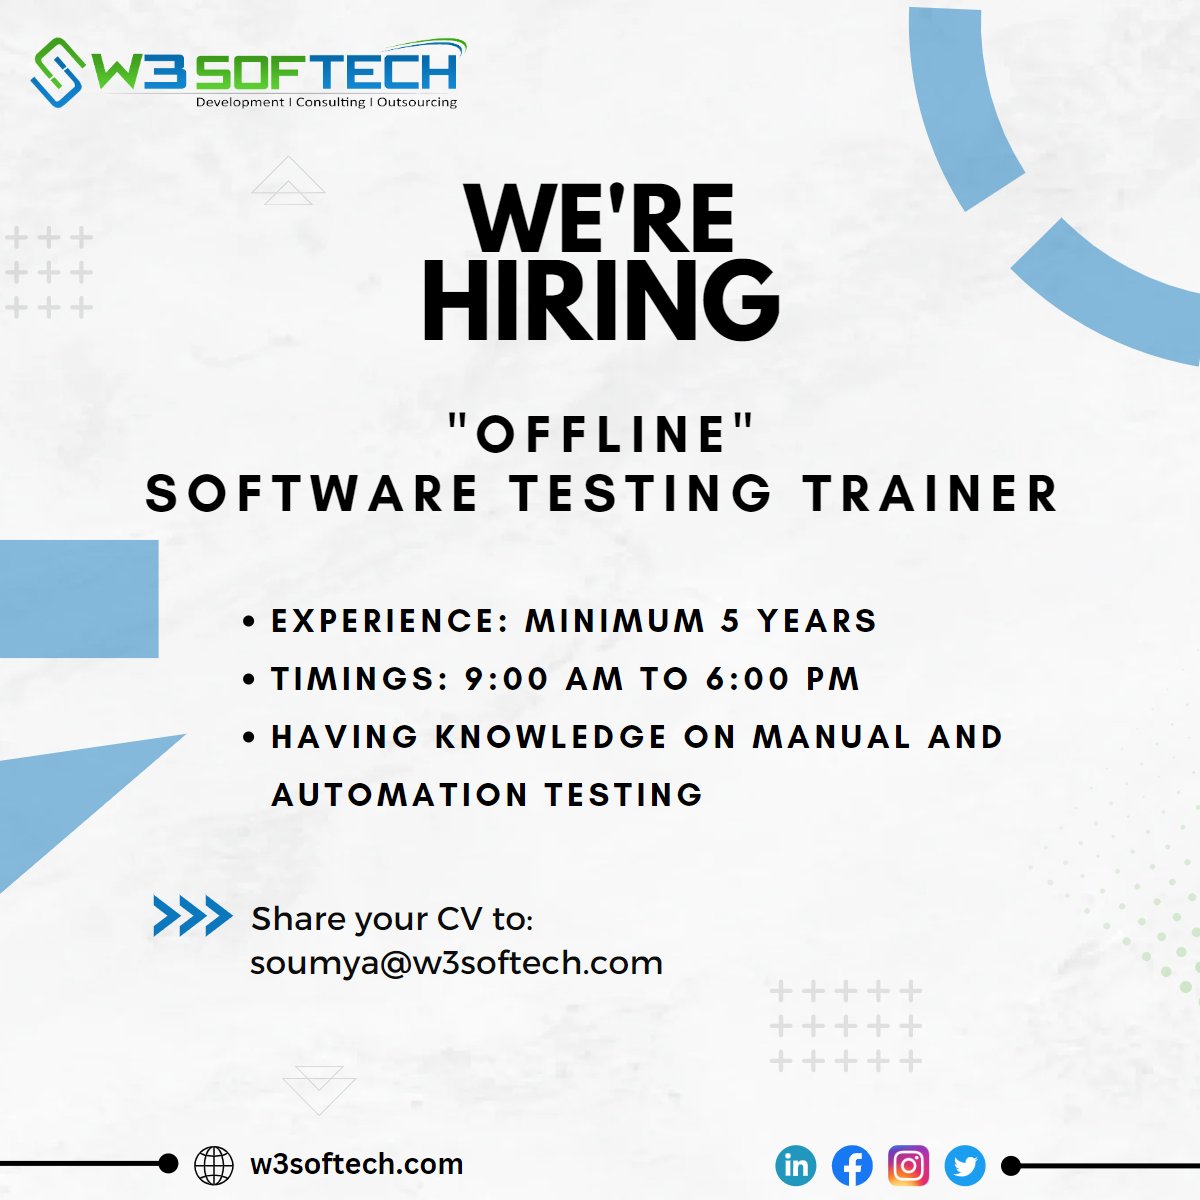 We are looking for a Software Testing Trainer having minimum 5 years of training experience who is an immediate joiner. Mode: Work from Office Work location: Hyderabad Timings: 9:00 am to 6:00 pm Share your CV to: Email: soumya@w3softech.com #hiring #softwaretrainer #IT